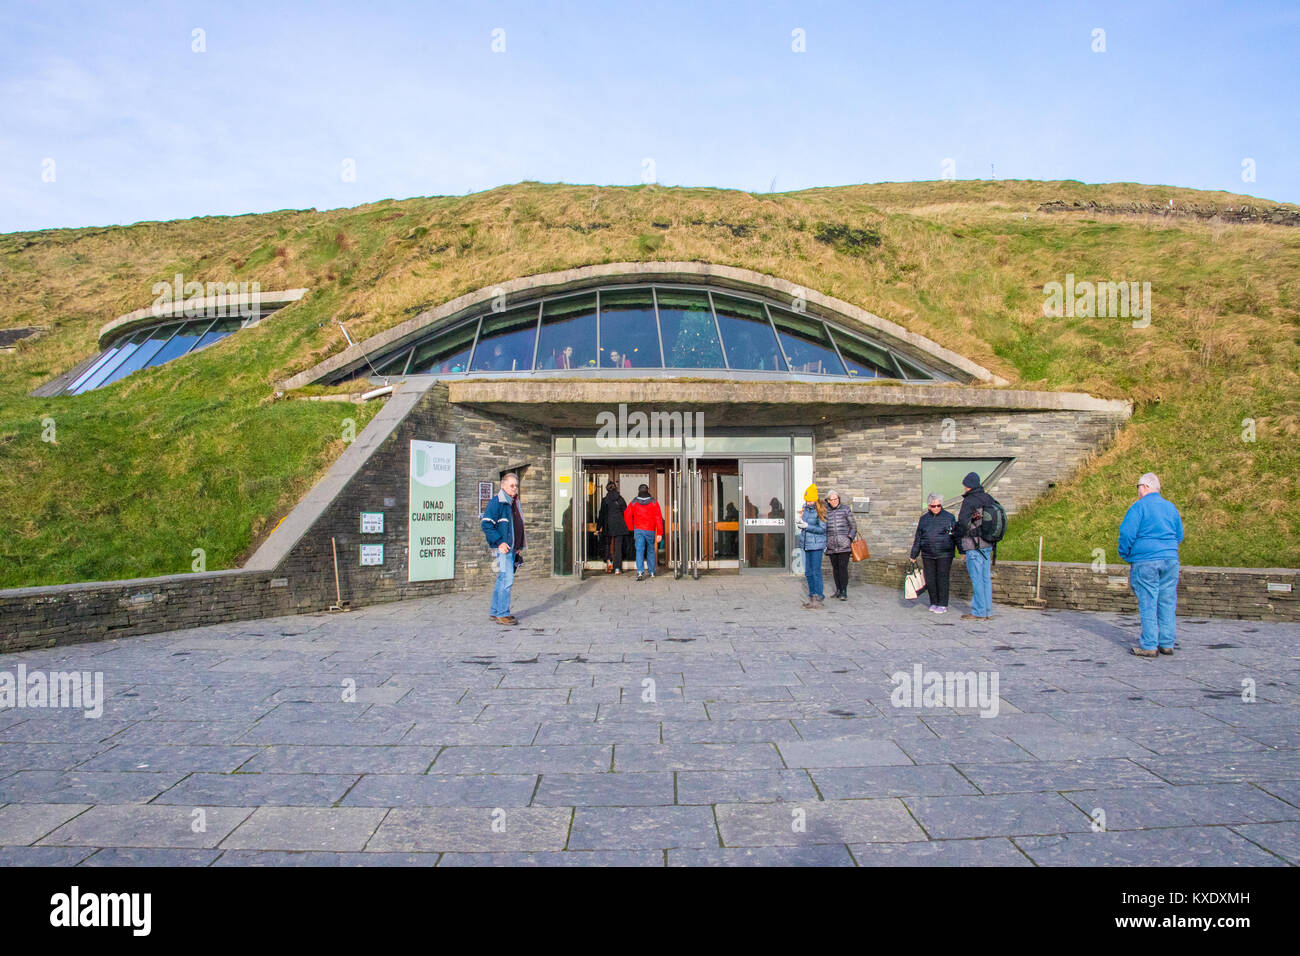 Visitors Center, Cliffs of Moher, County Clare, Irland Stockfoto